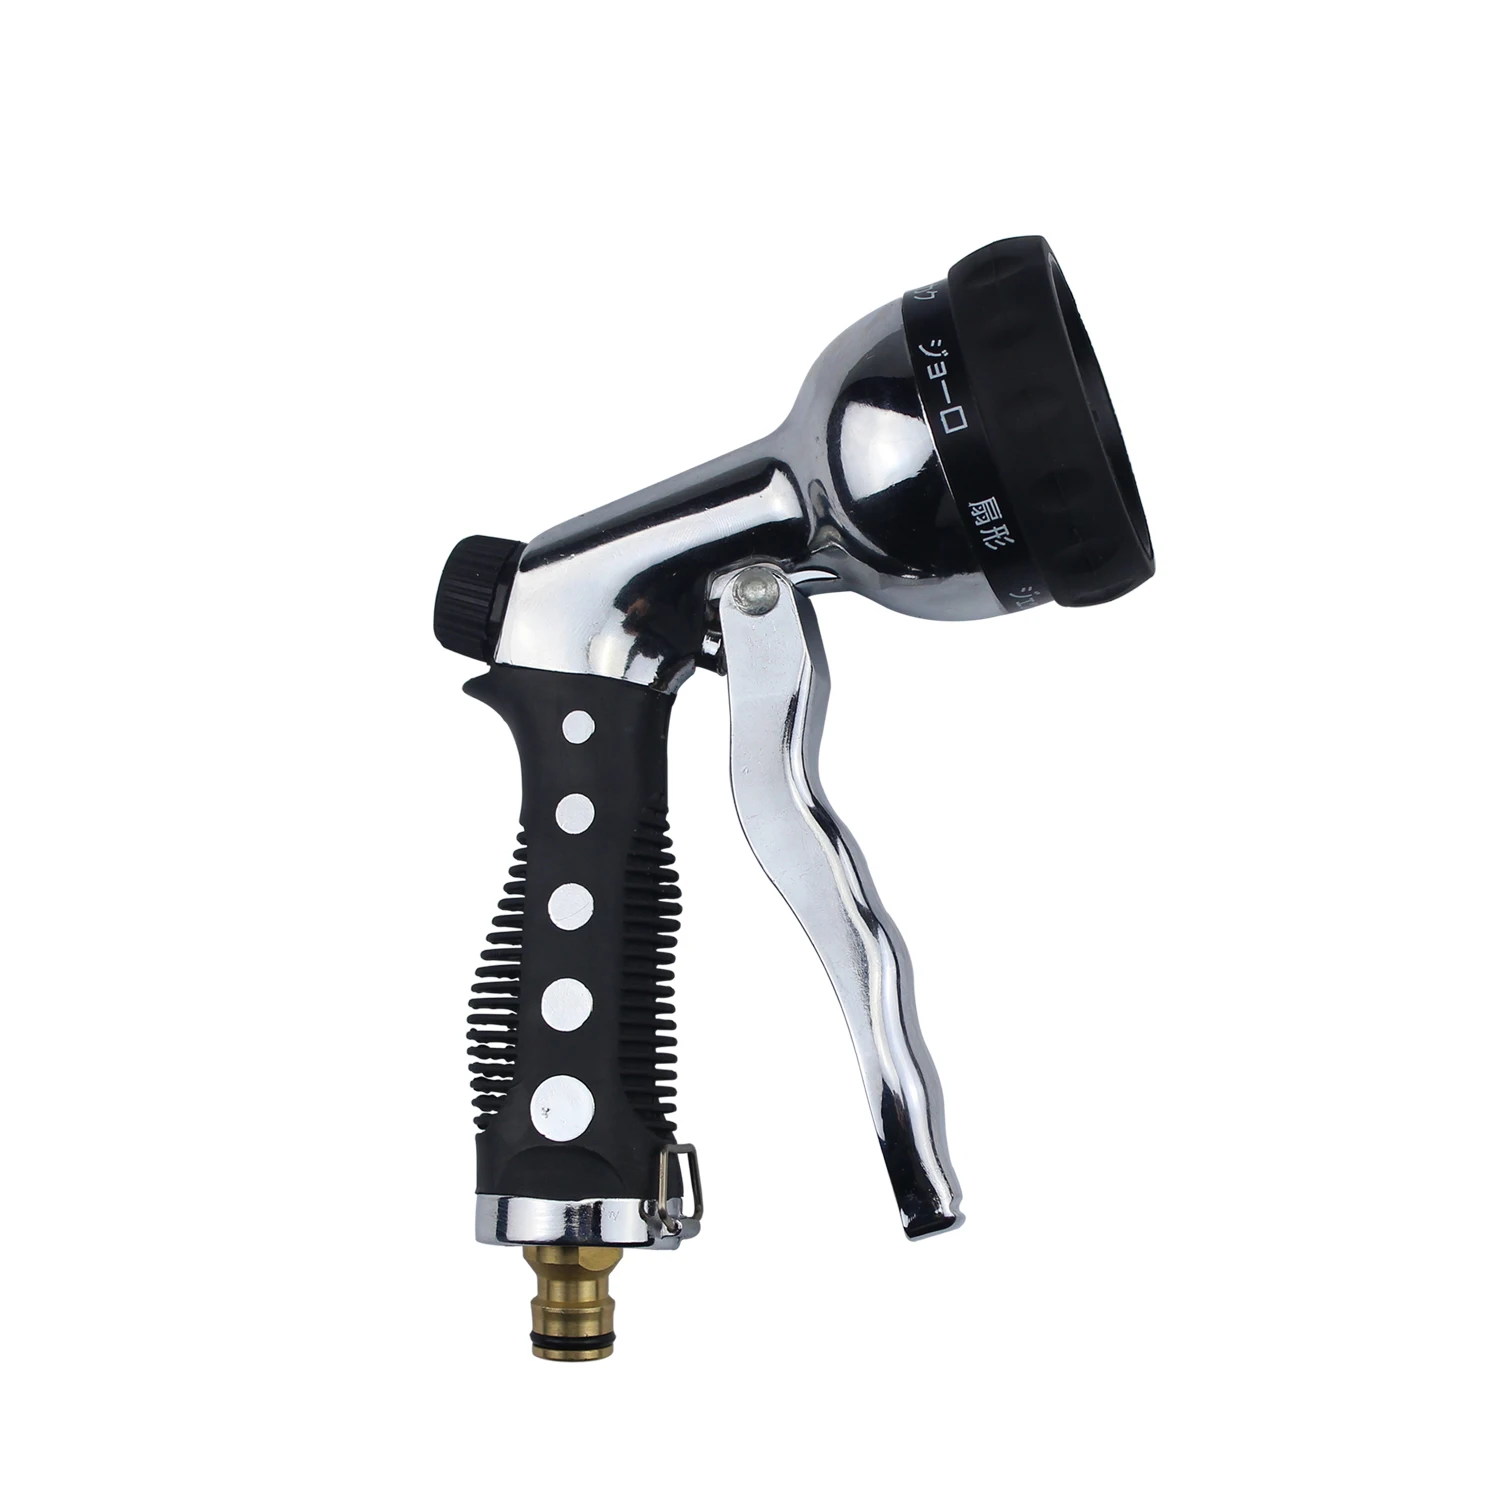 2 hours reply 8-function spray gun direct